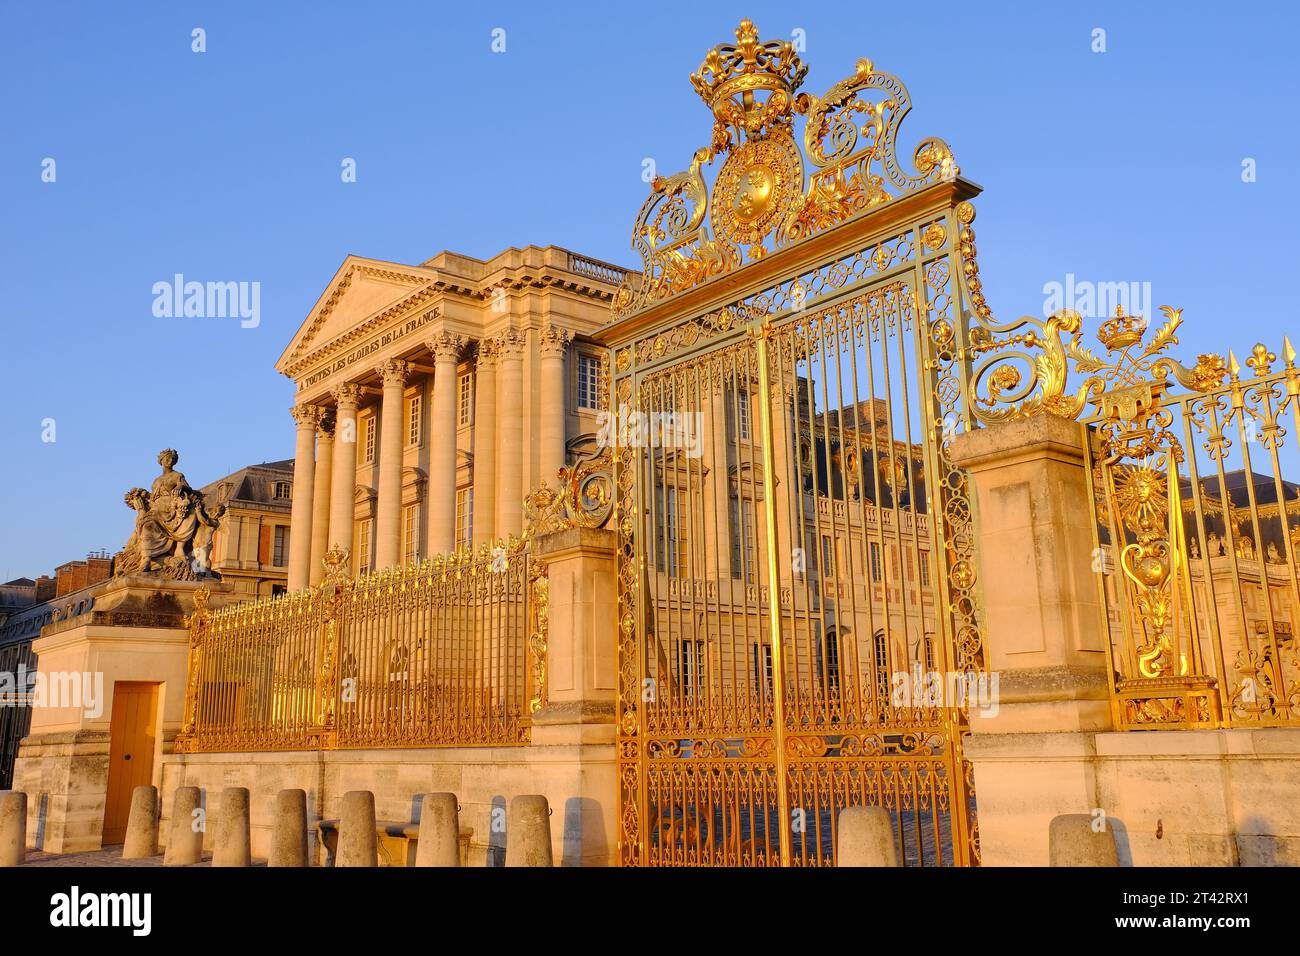 Versailles: Front face (East façade and courtyard) and entrance gate of the palace glowing orange just after sunrise at Versailles, Ile-de-France Stock Photo